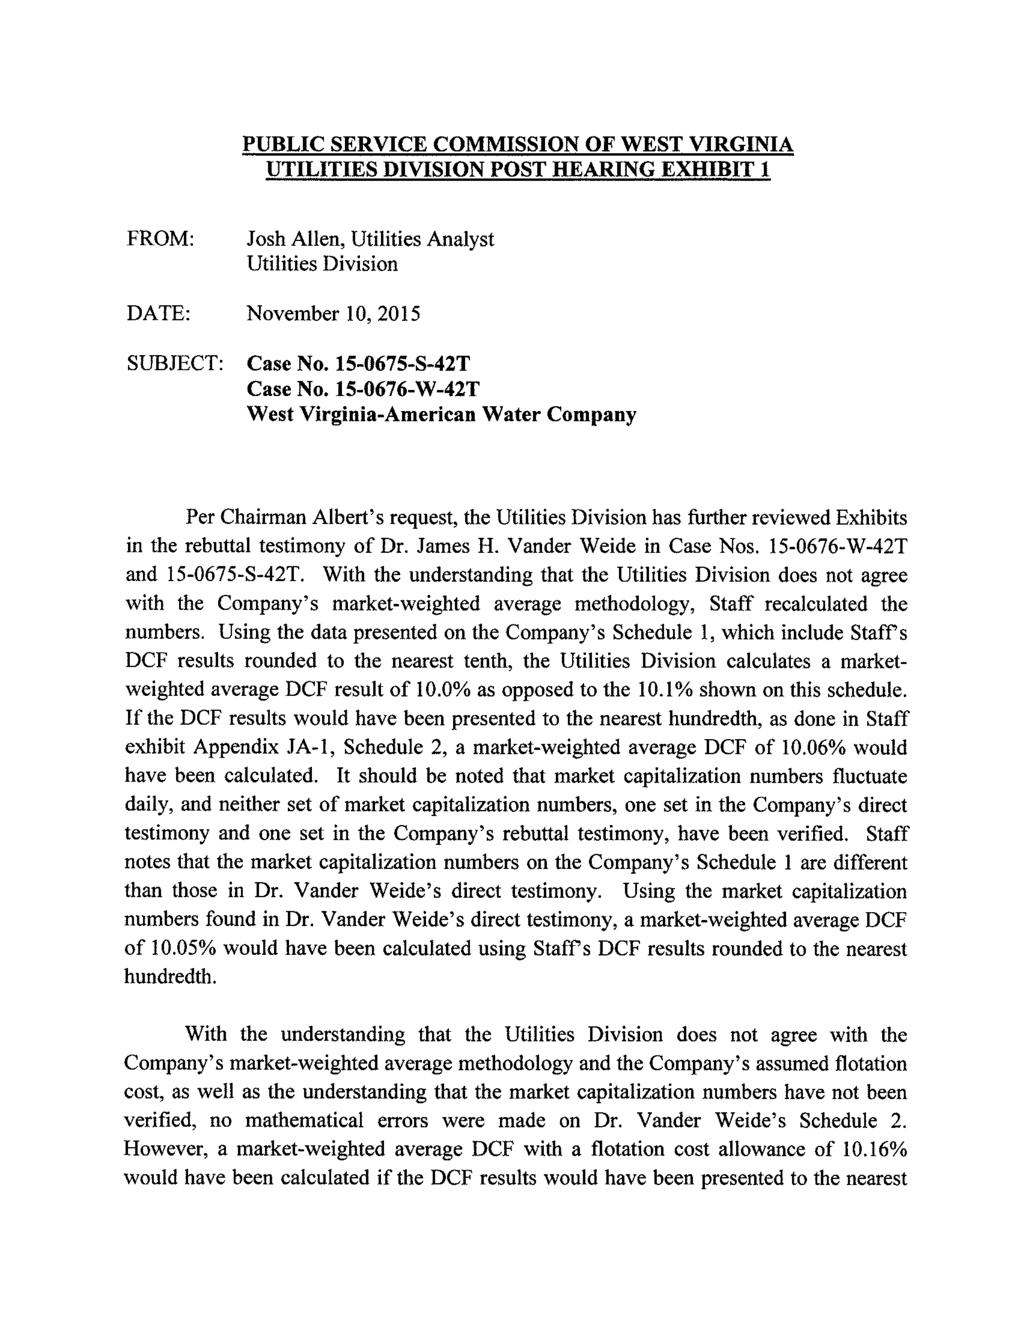 PUBLIC SERVICE COMMISSION OF WEST VlRGINIA UTlLlTlES DIVISION POST HEARING EXHIBlT 1 FROM: Josh Allen, Utilities Analyst Utilities Division DATE: November 10.20 15 SUBJECT: Case No.